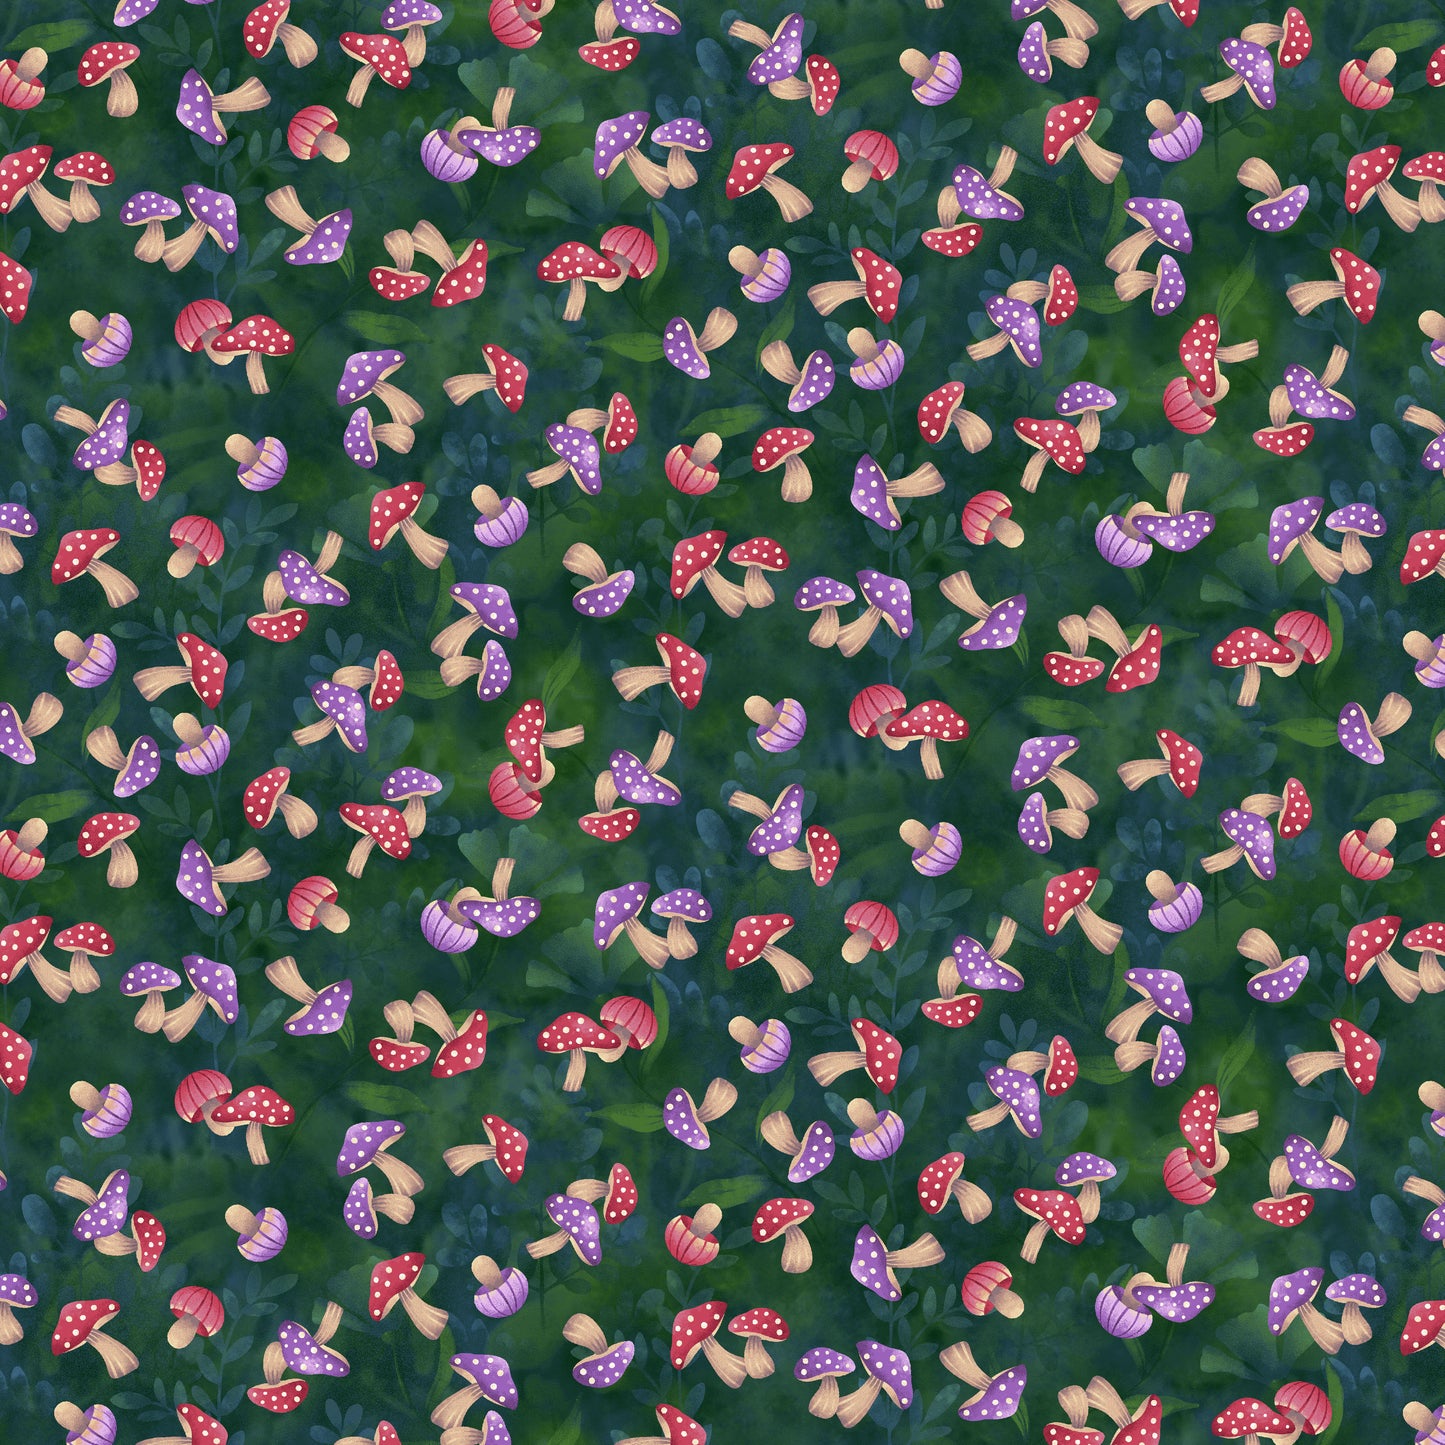 Fairytale Forest by Color Principle Mushrooms Forest    3016-66 Cotton Woven Fabric